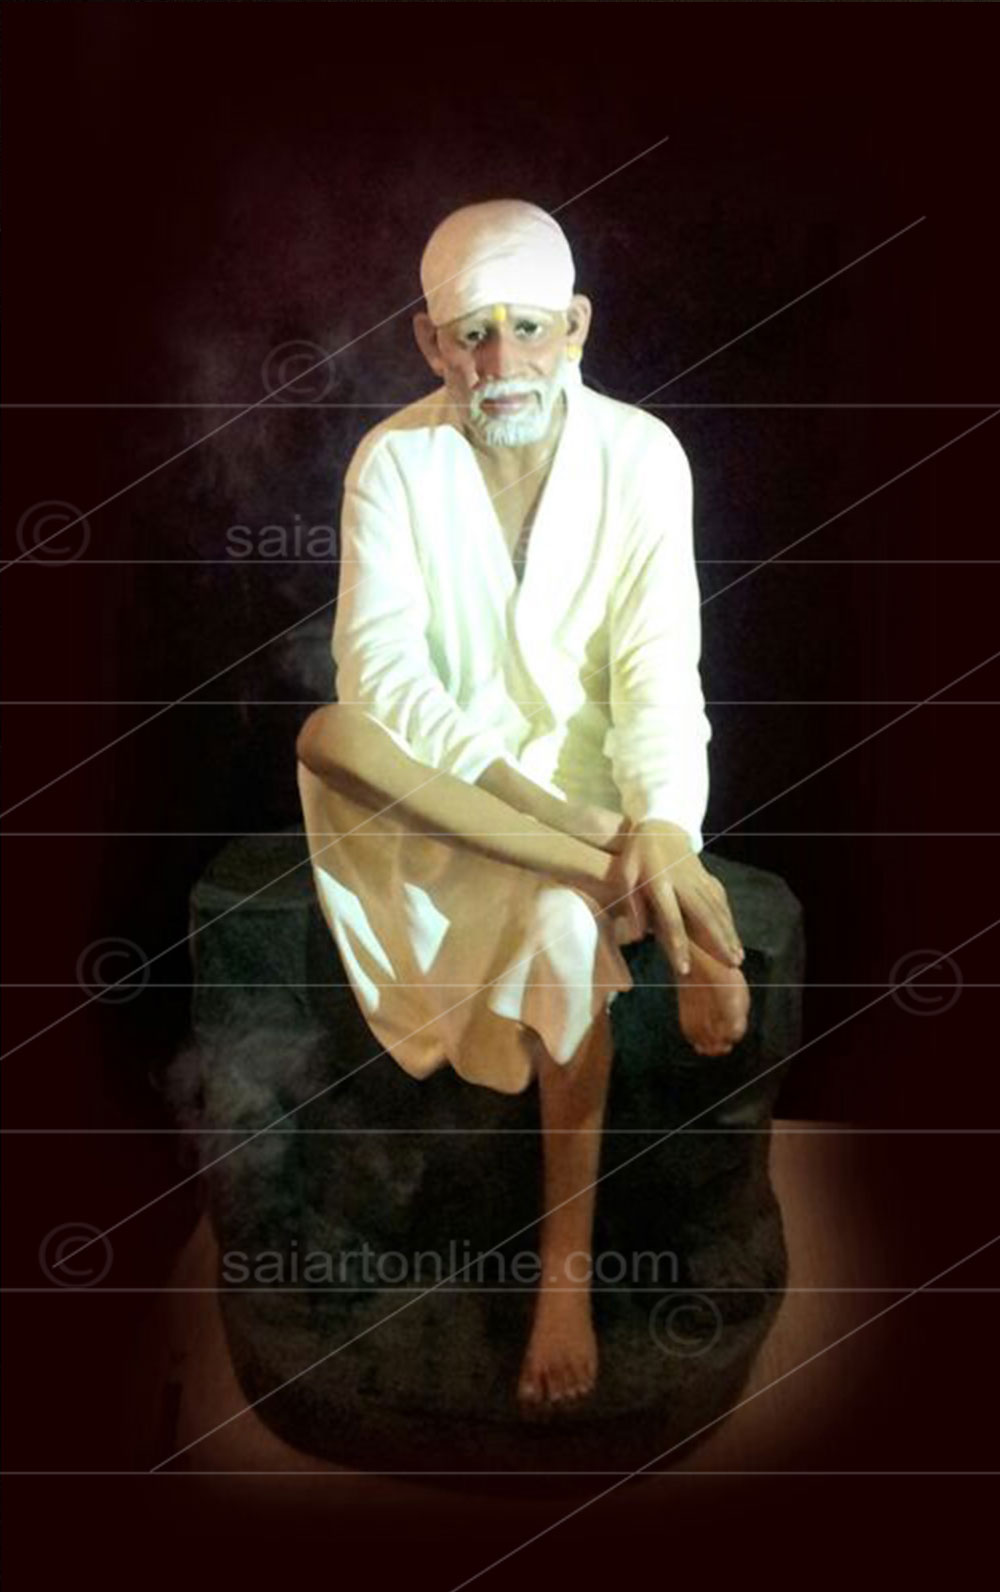 Buy Online Sai Baba Moorti and Idols for Homedecor, Car's and office's